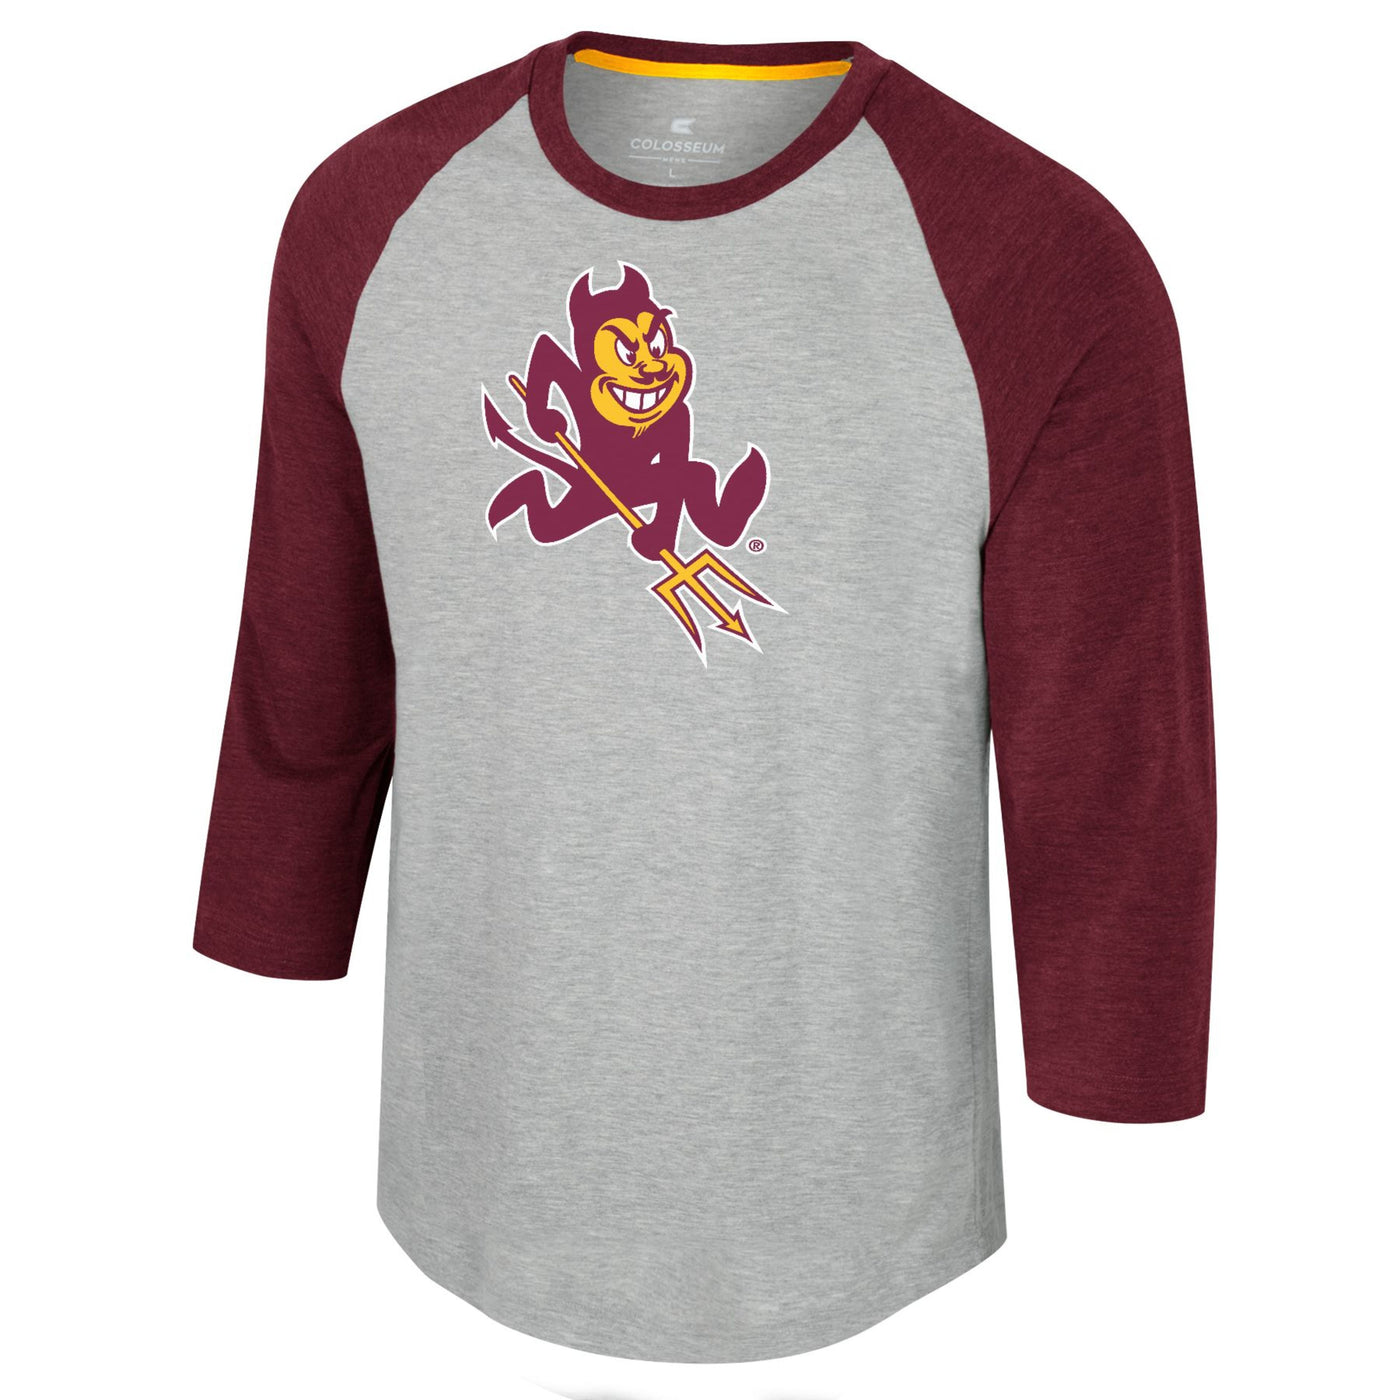 ASU grey long sleeve shirt with maroon sleeves and neckline. A large sparky mascot on chest,